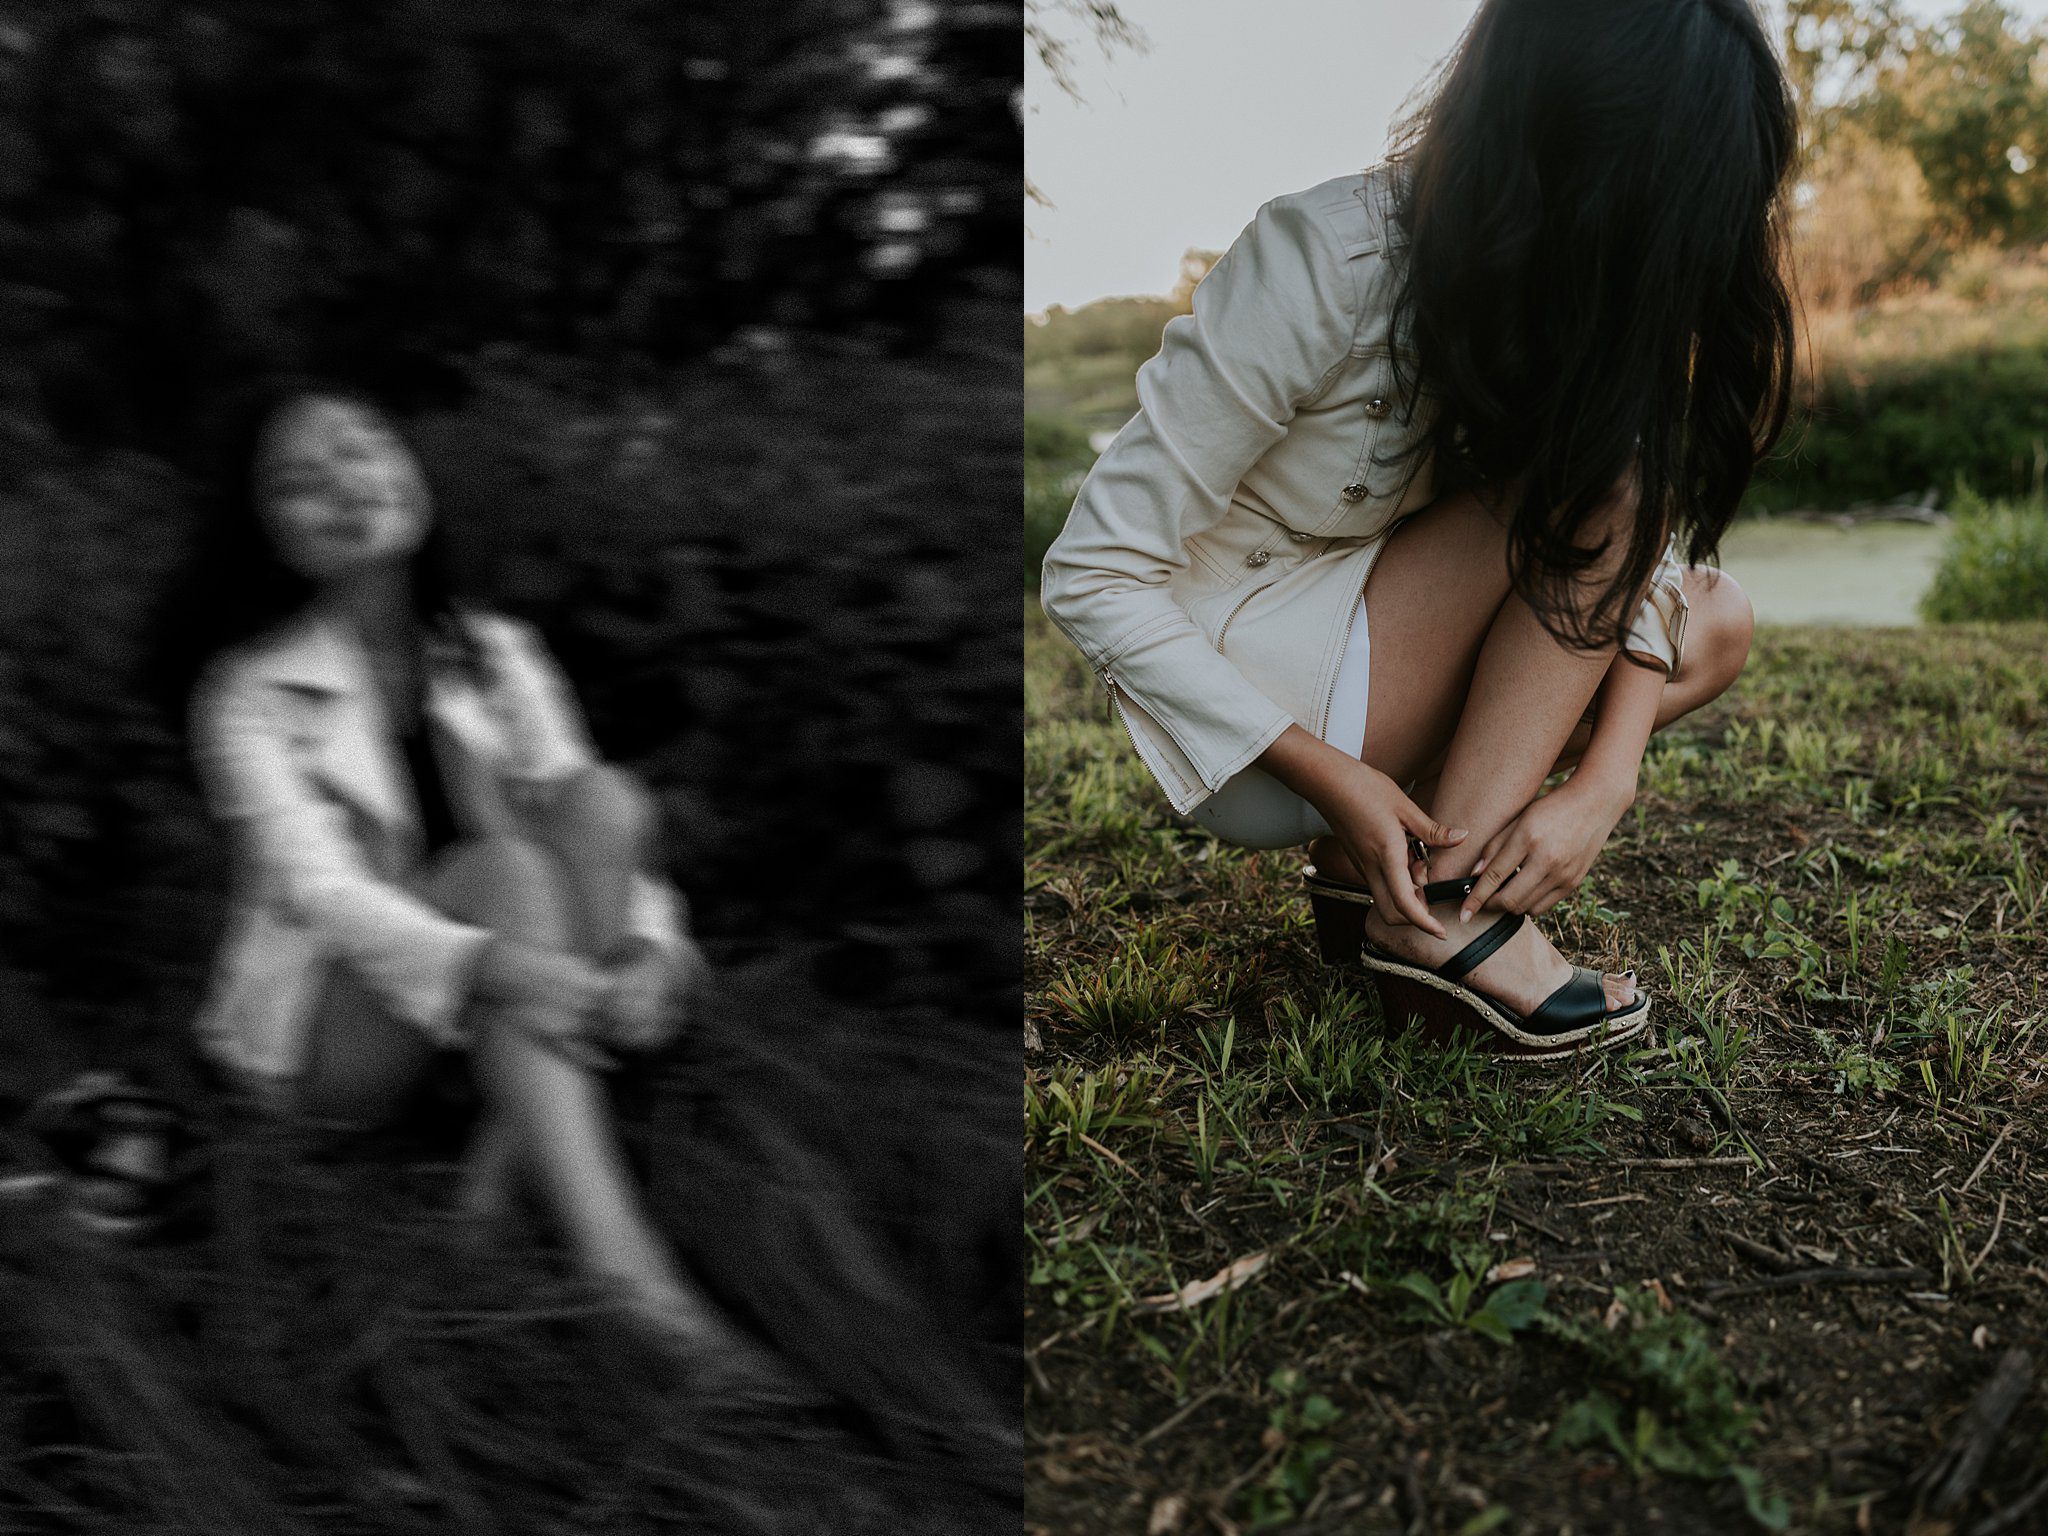 This is a dip-tic of two photos. On the left is a beautiful blurry black and white image of a girl sitting in the grass smiling. On the right the same girl with black hair is tying on her strapy sandals for her senior portraits.